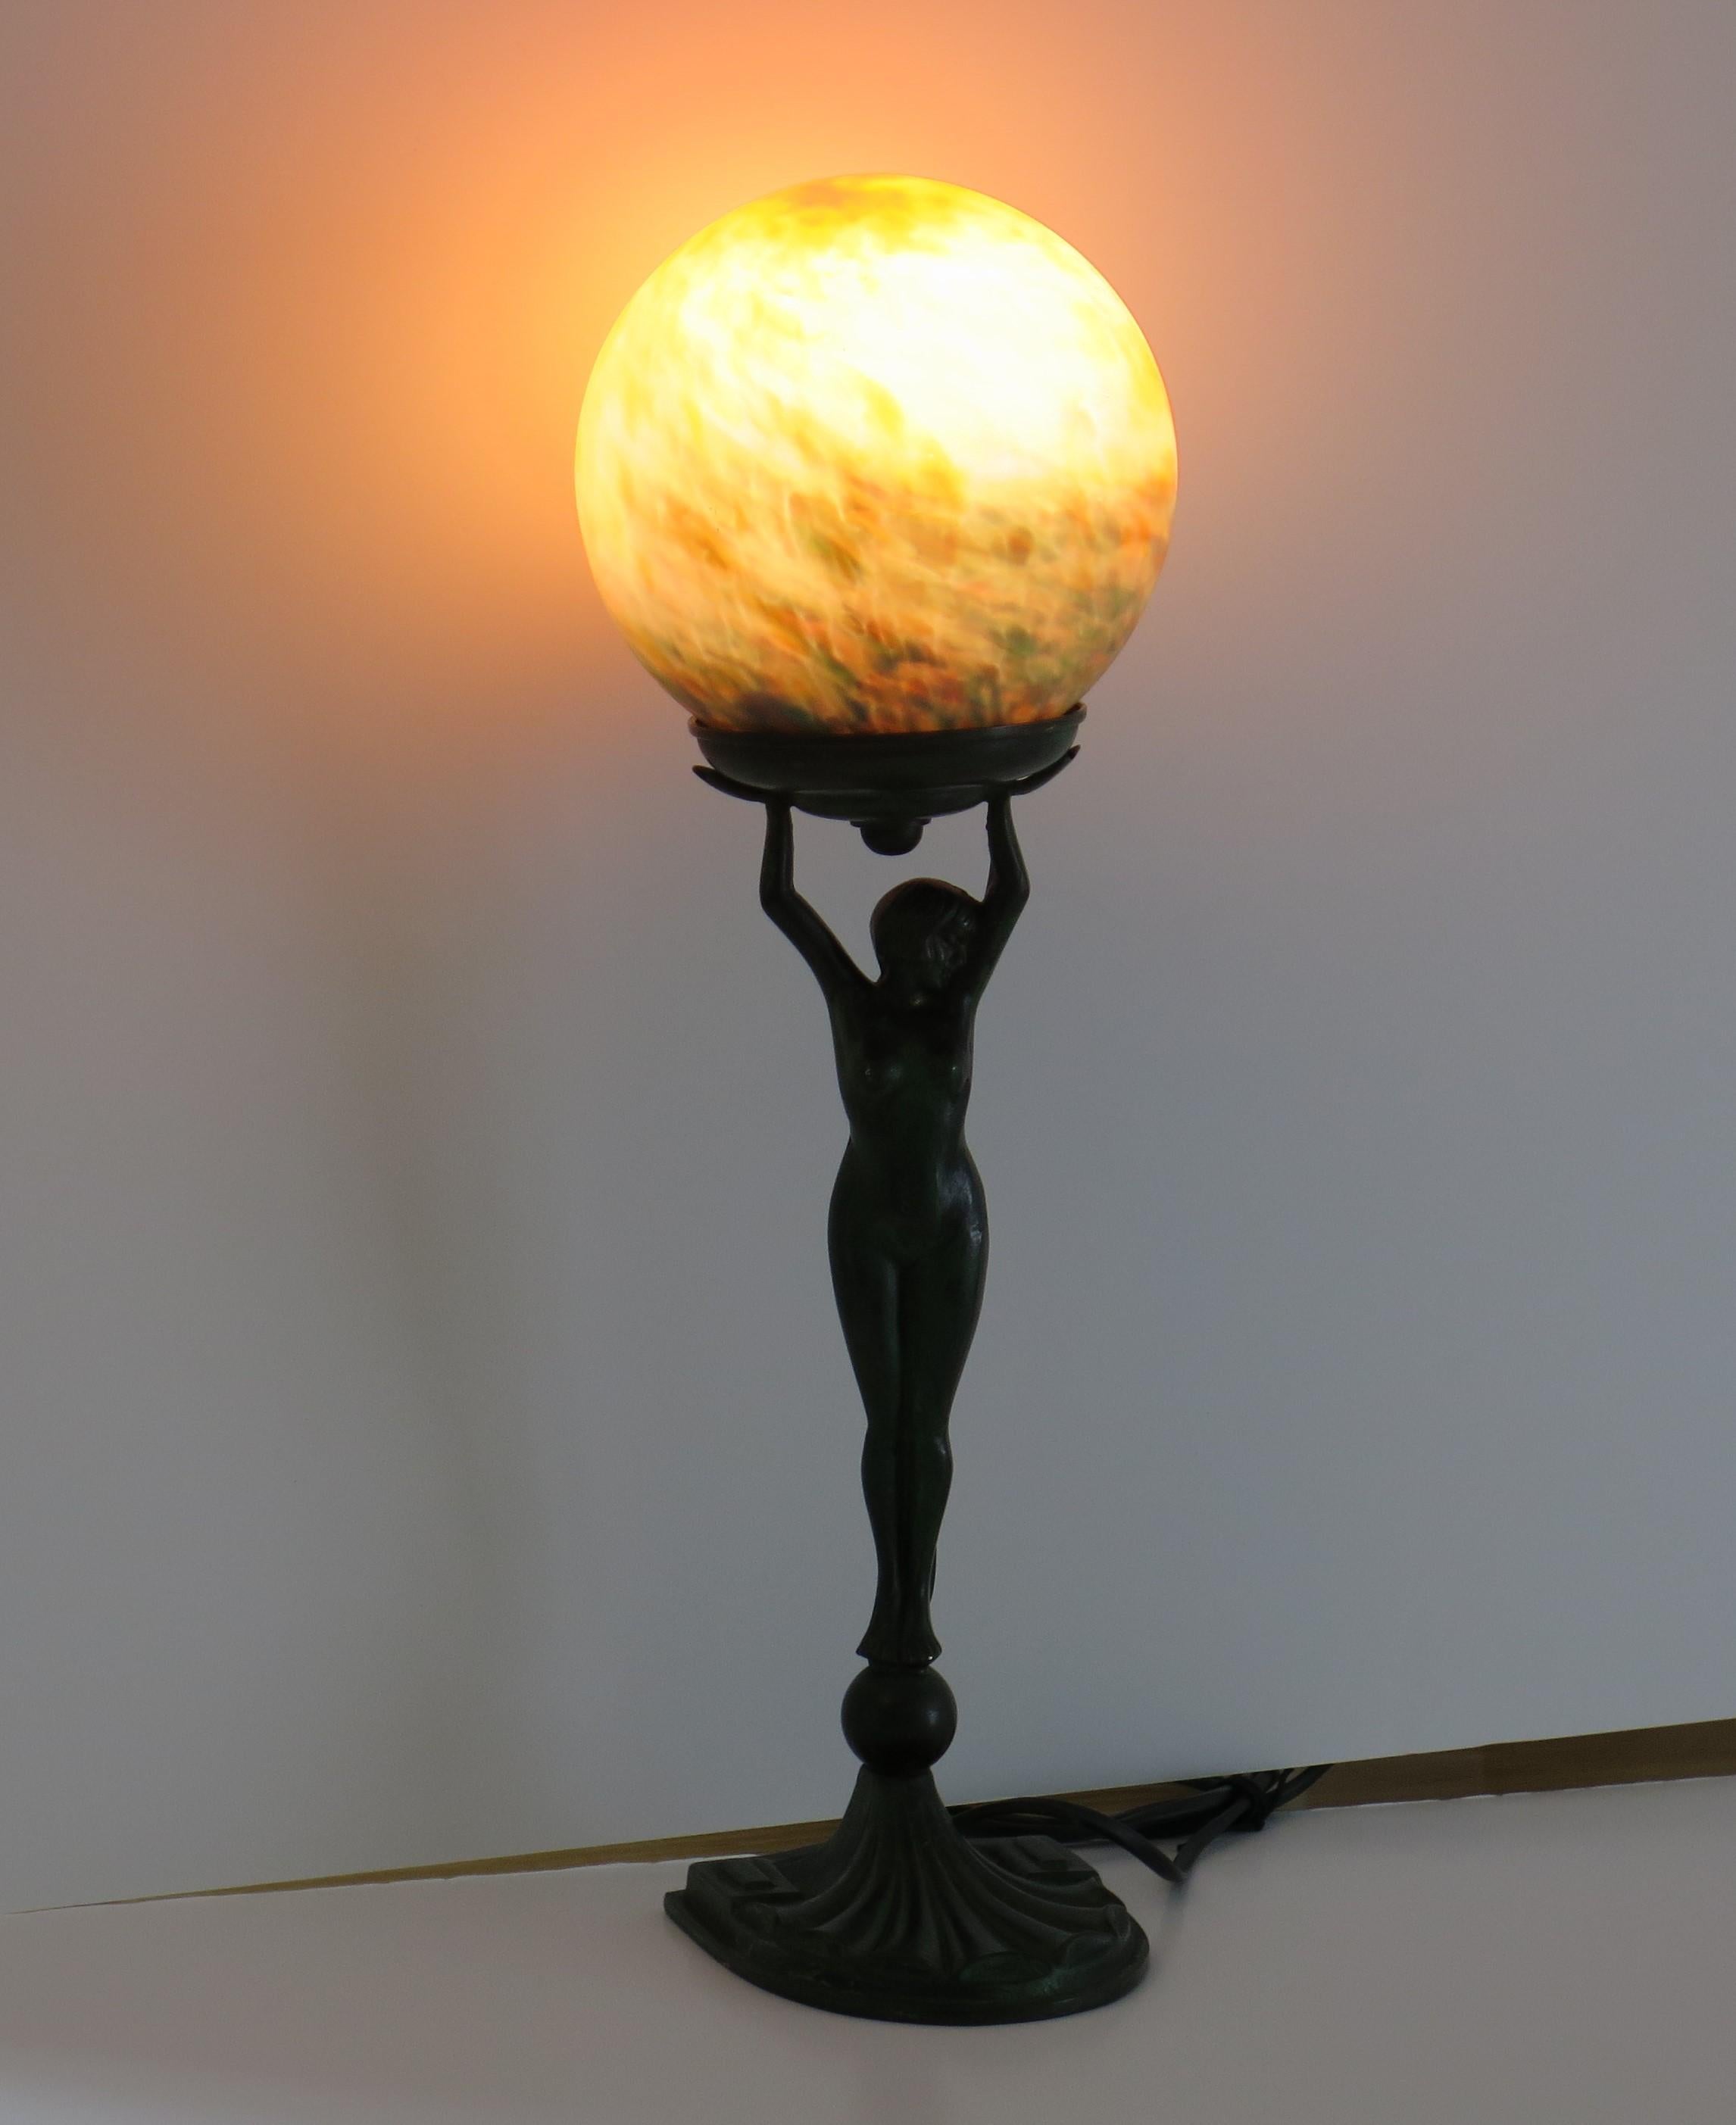 This is a stunning figurine table lamp of a nude lady bronze Figurine sculpture made in France, circa 1930.

The figurine is heavy and made of bronze metal with good detail. It has been cold painted with a green colour which has worn away in